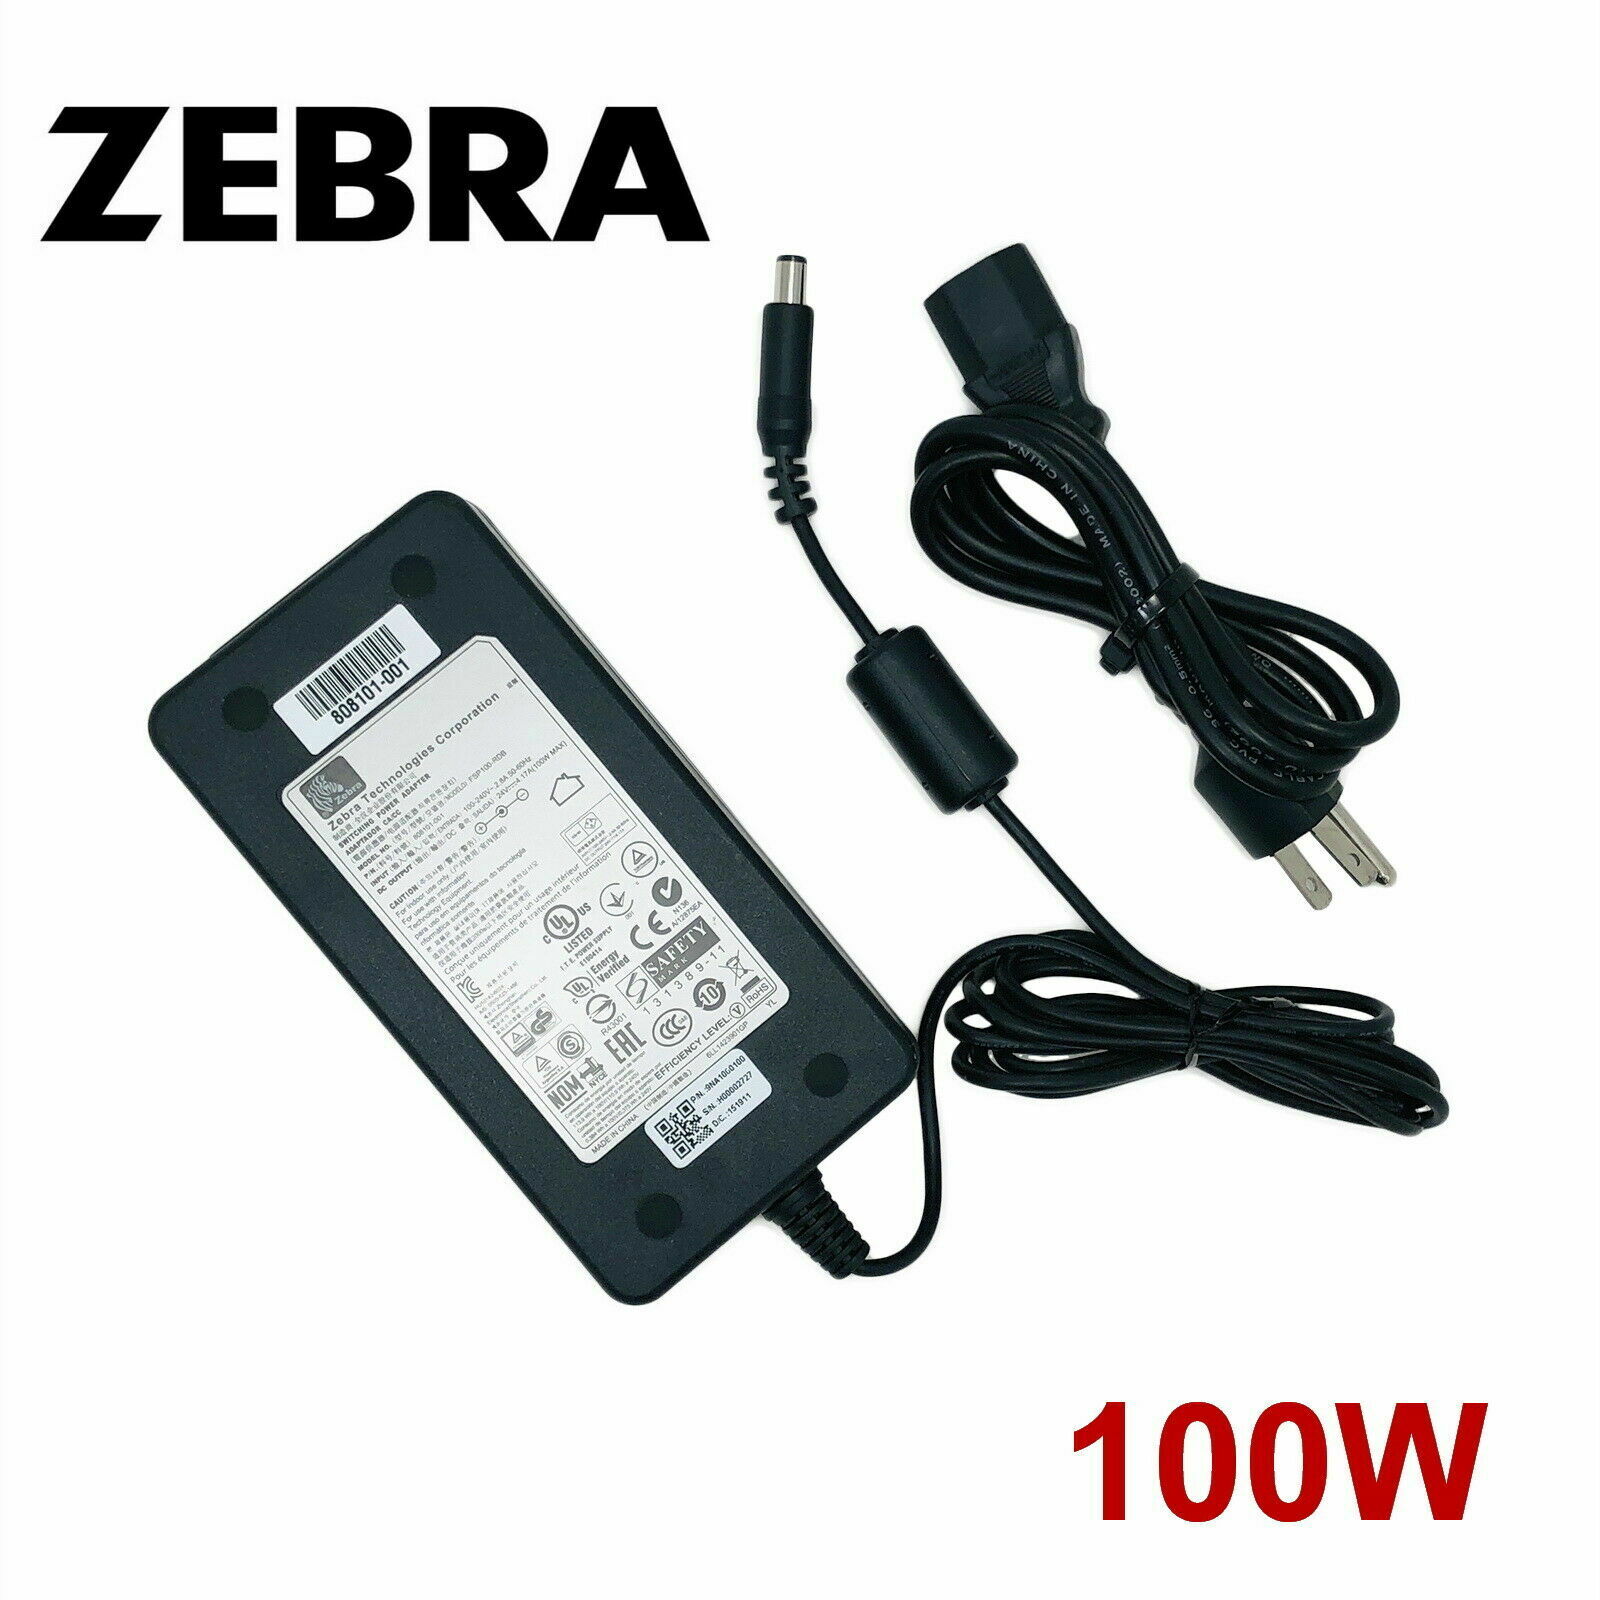 OEM Original Zebra AC Adapter For ZXP ZC300 Series 1 I ID Card Thermal Printer Compatible Brand: For Zebra Type: AC